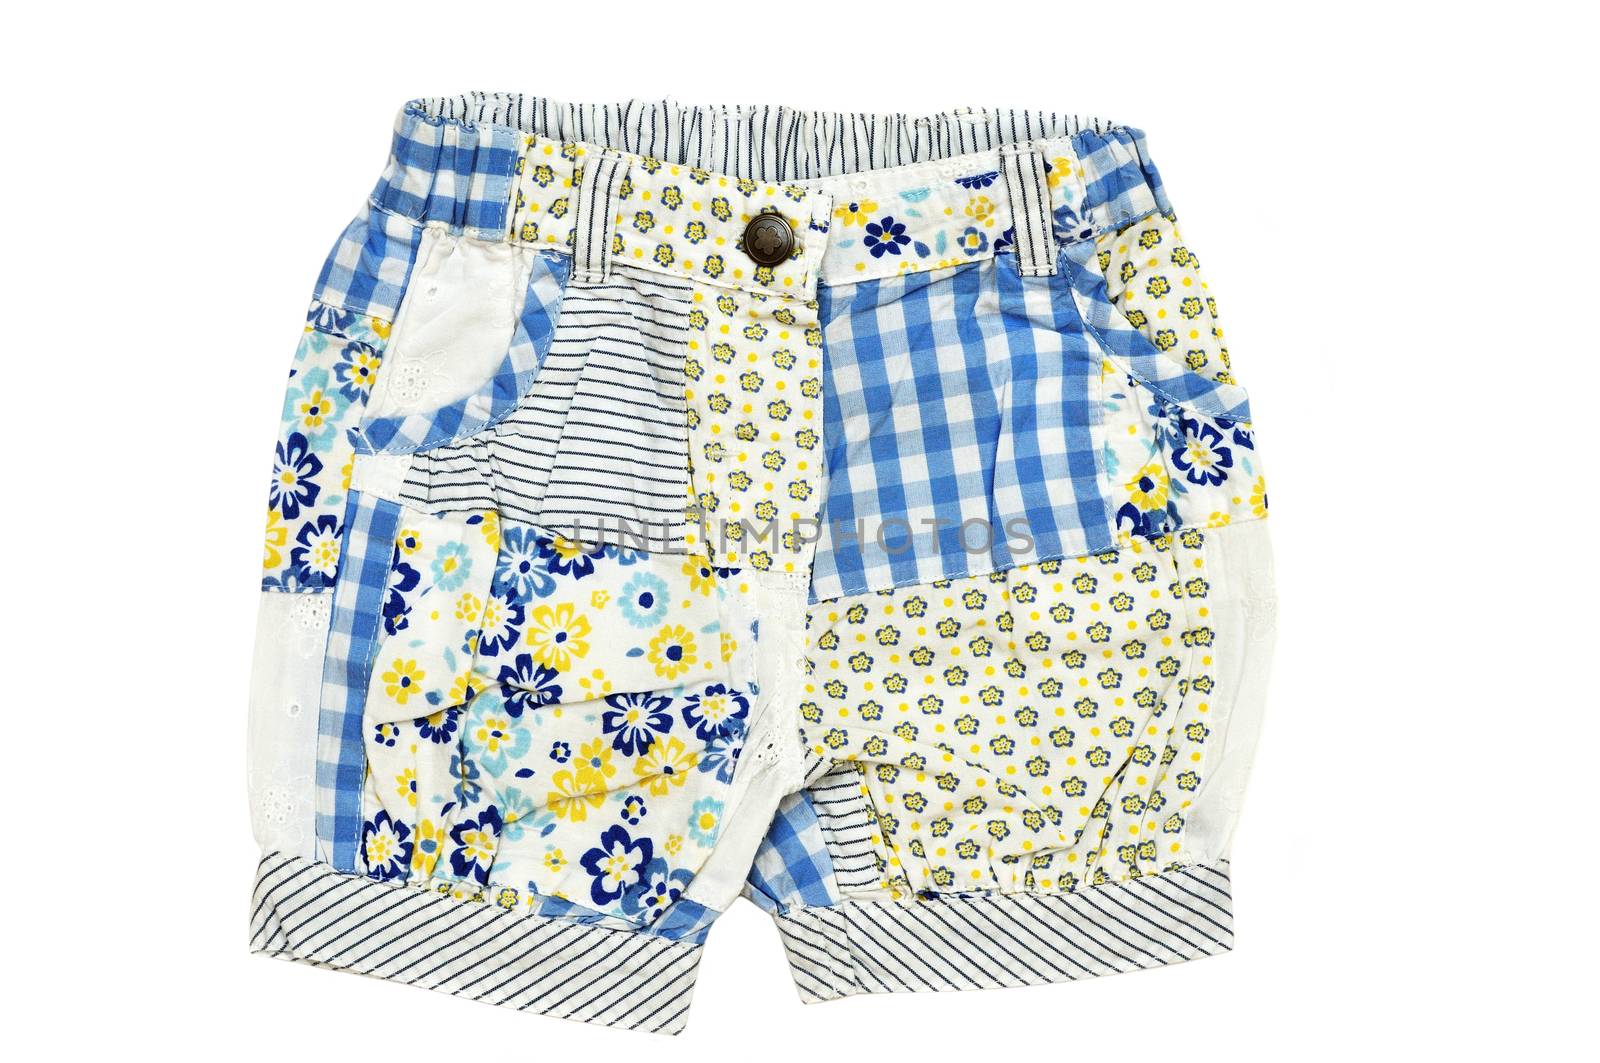 baby girl's shorts on over the white background